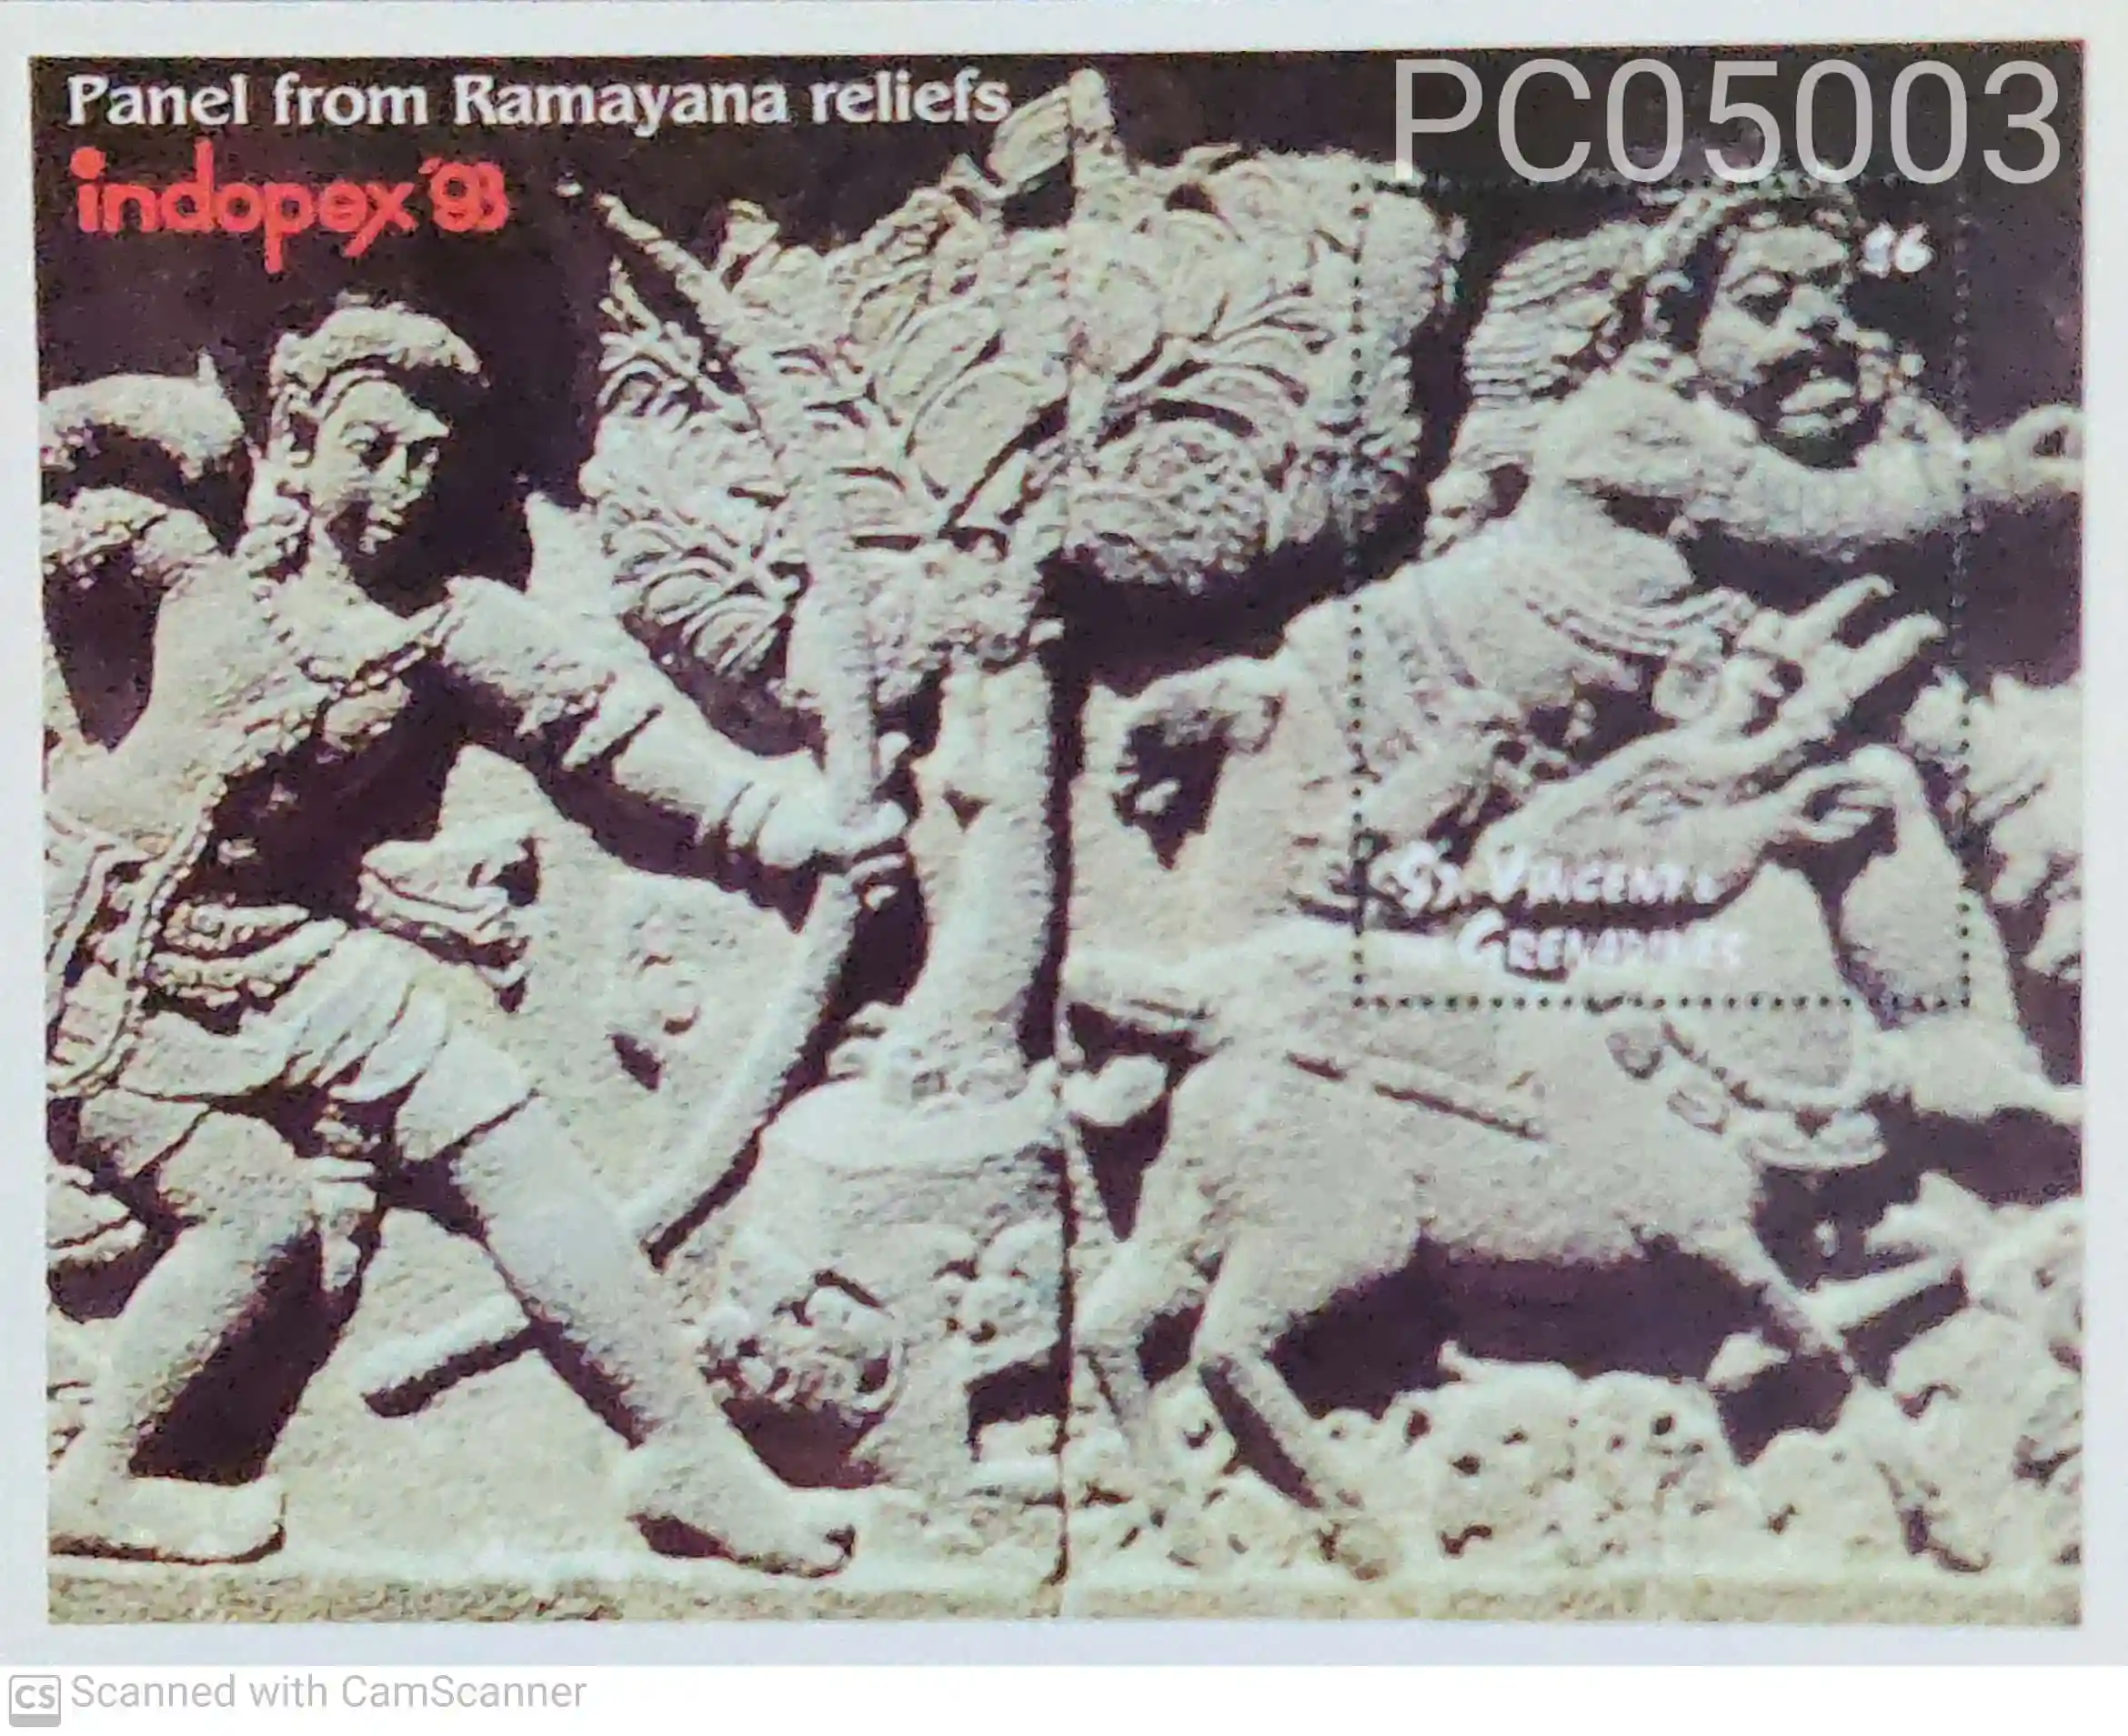 Saint Vincent and the Grenadines 1993 Panel from Ramayana Reliefs INDOPEX 93 Hinduism UMM Miniature Sheet PC05003